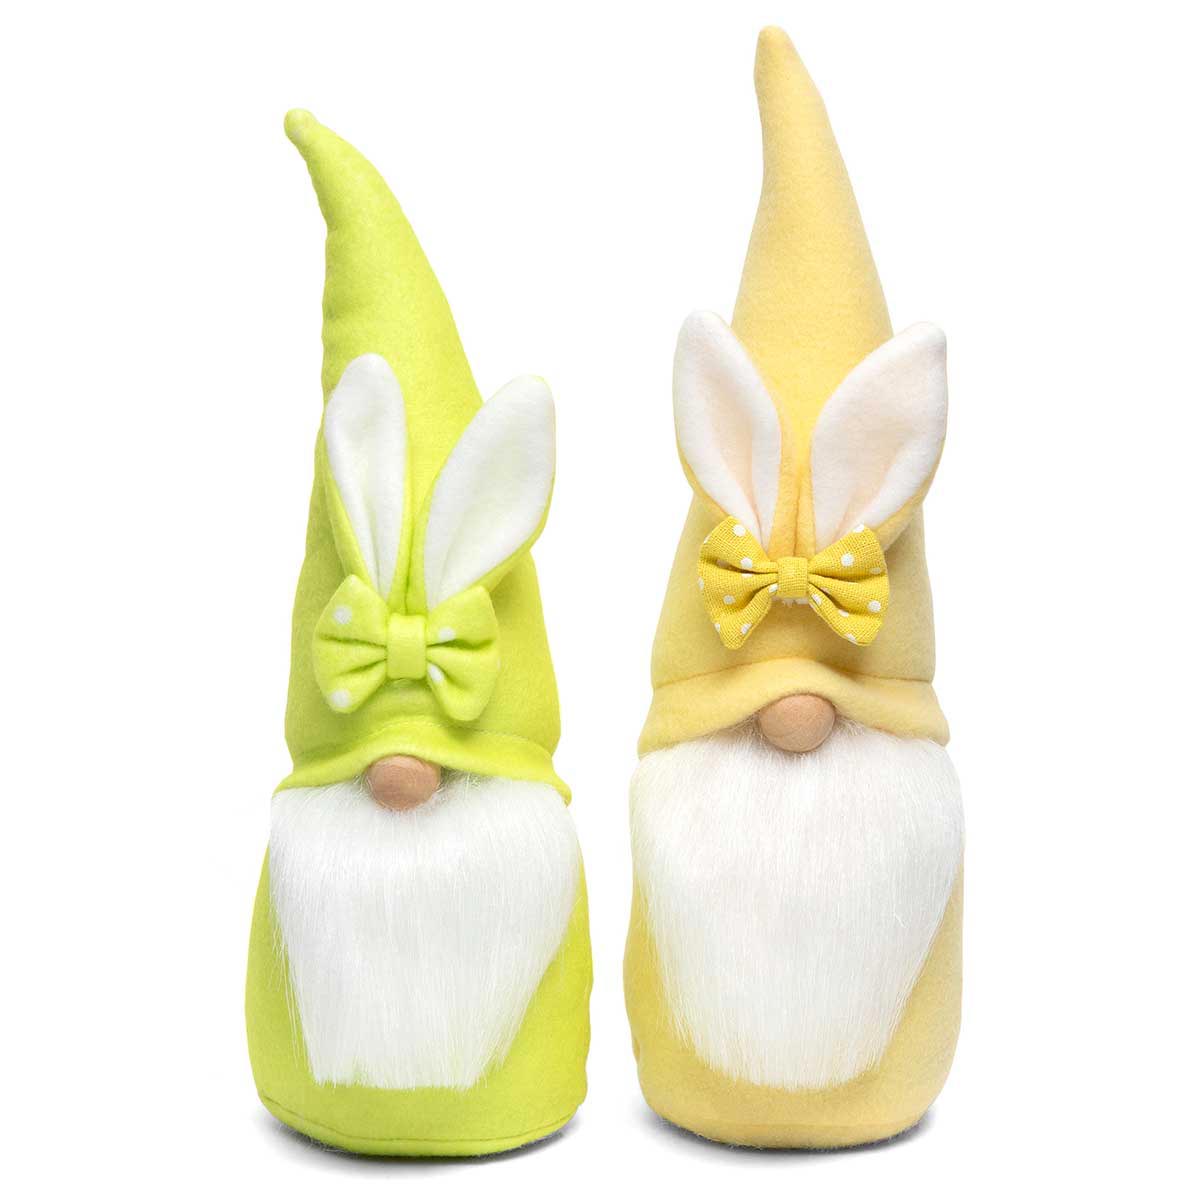 !Gnome with Bow/Bunny Ears, Wood Nose 11.25" Lg